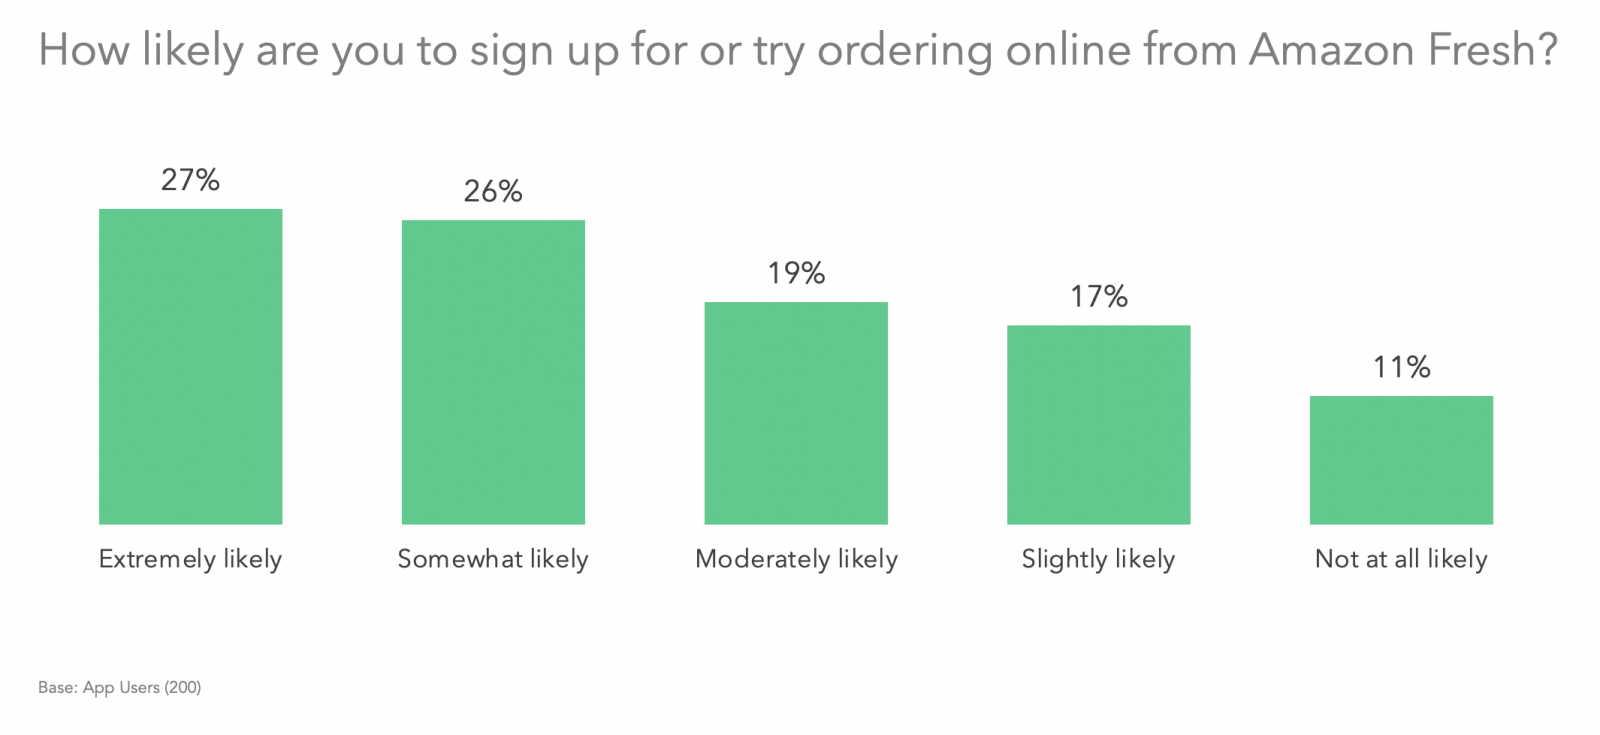 How likely are you to sign up for or try ordering online from Amazon Fresh?